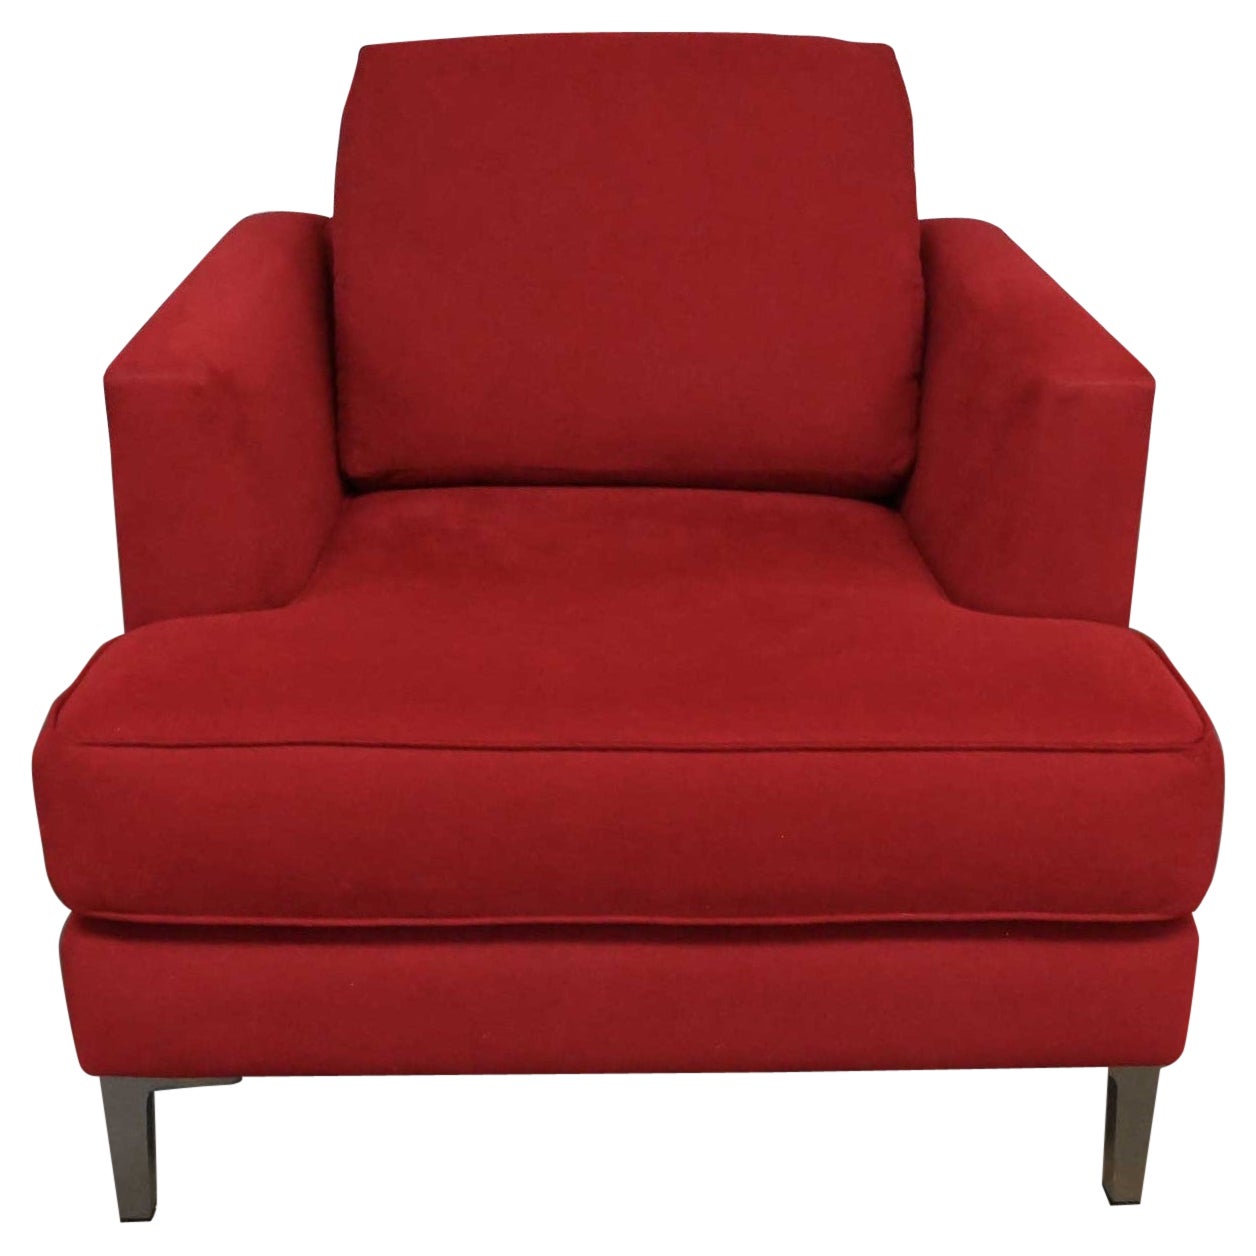 Modern Carter Club Chair Attr Zen Collection Bright Red with Polished Steel Legs For Sale